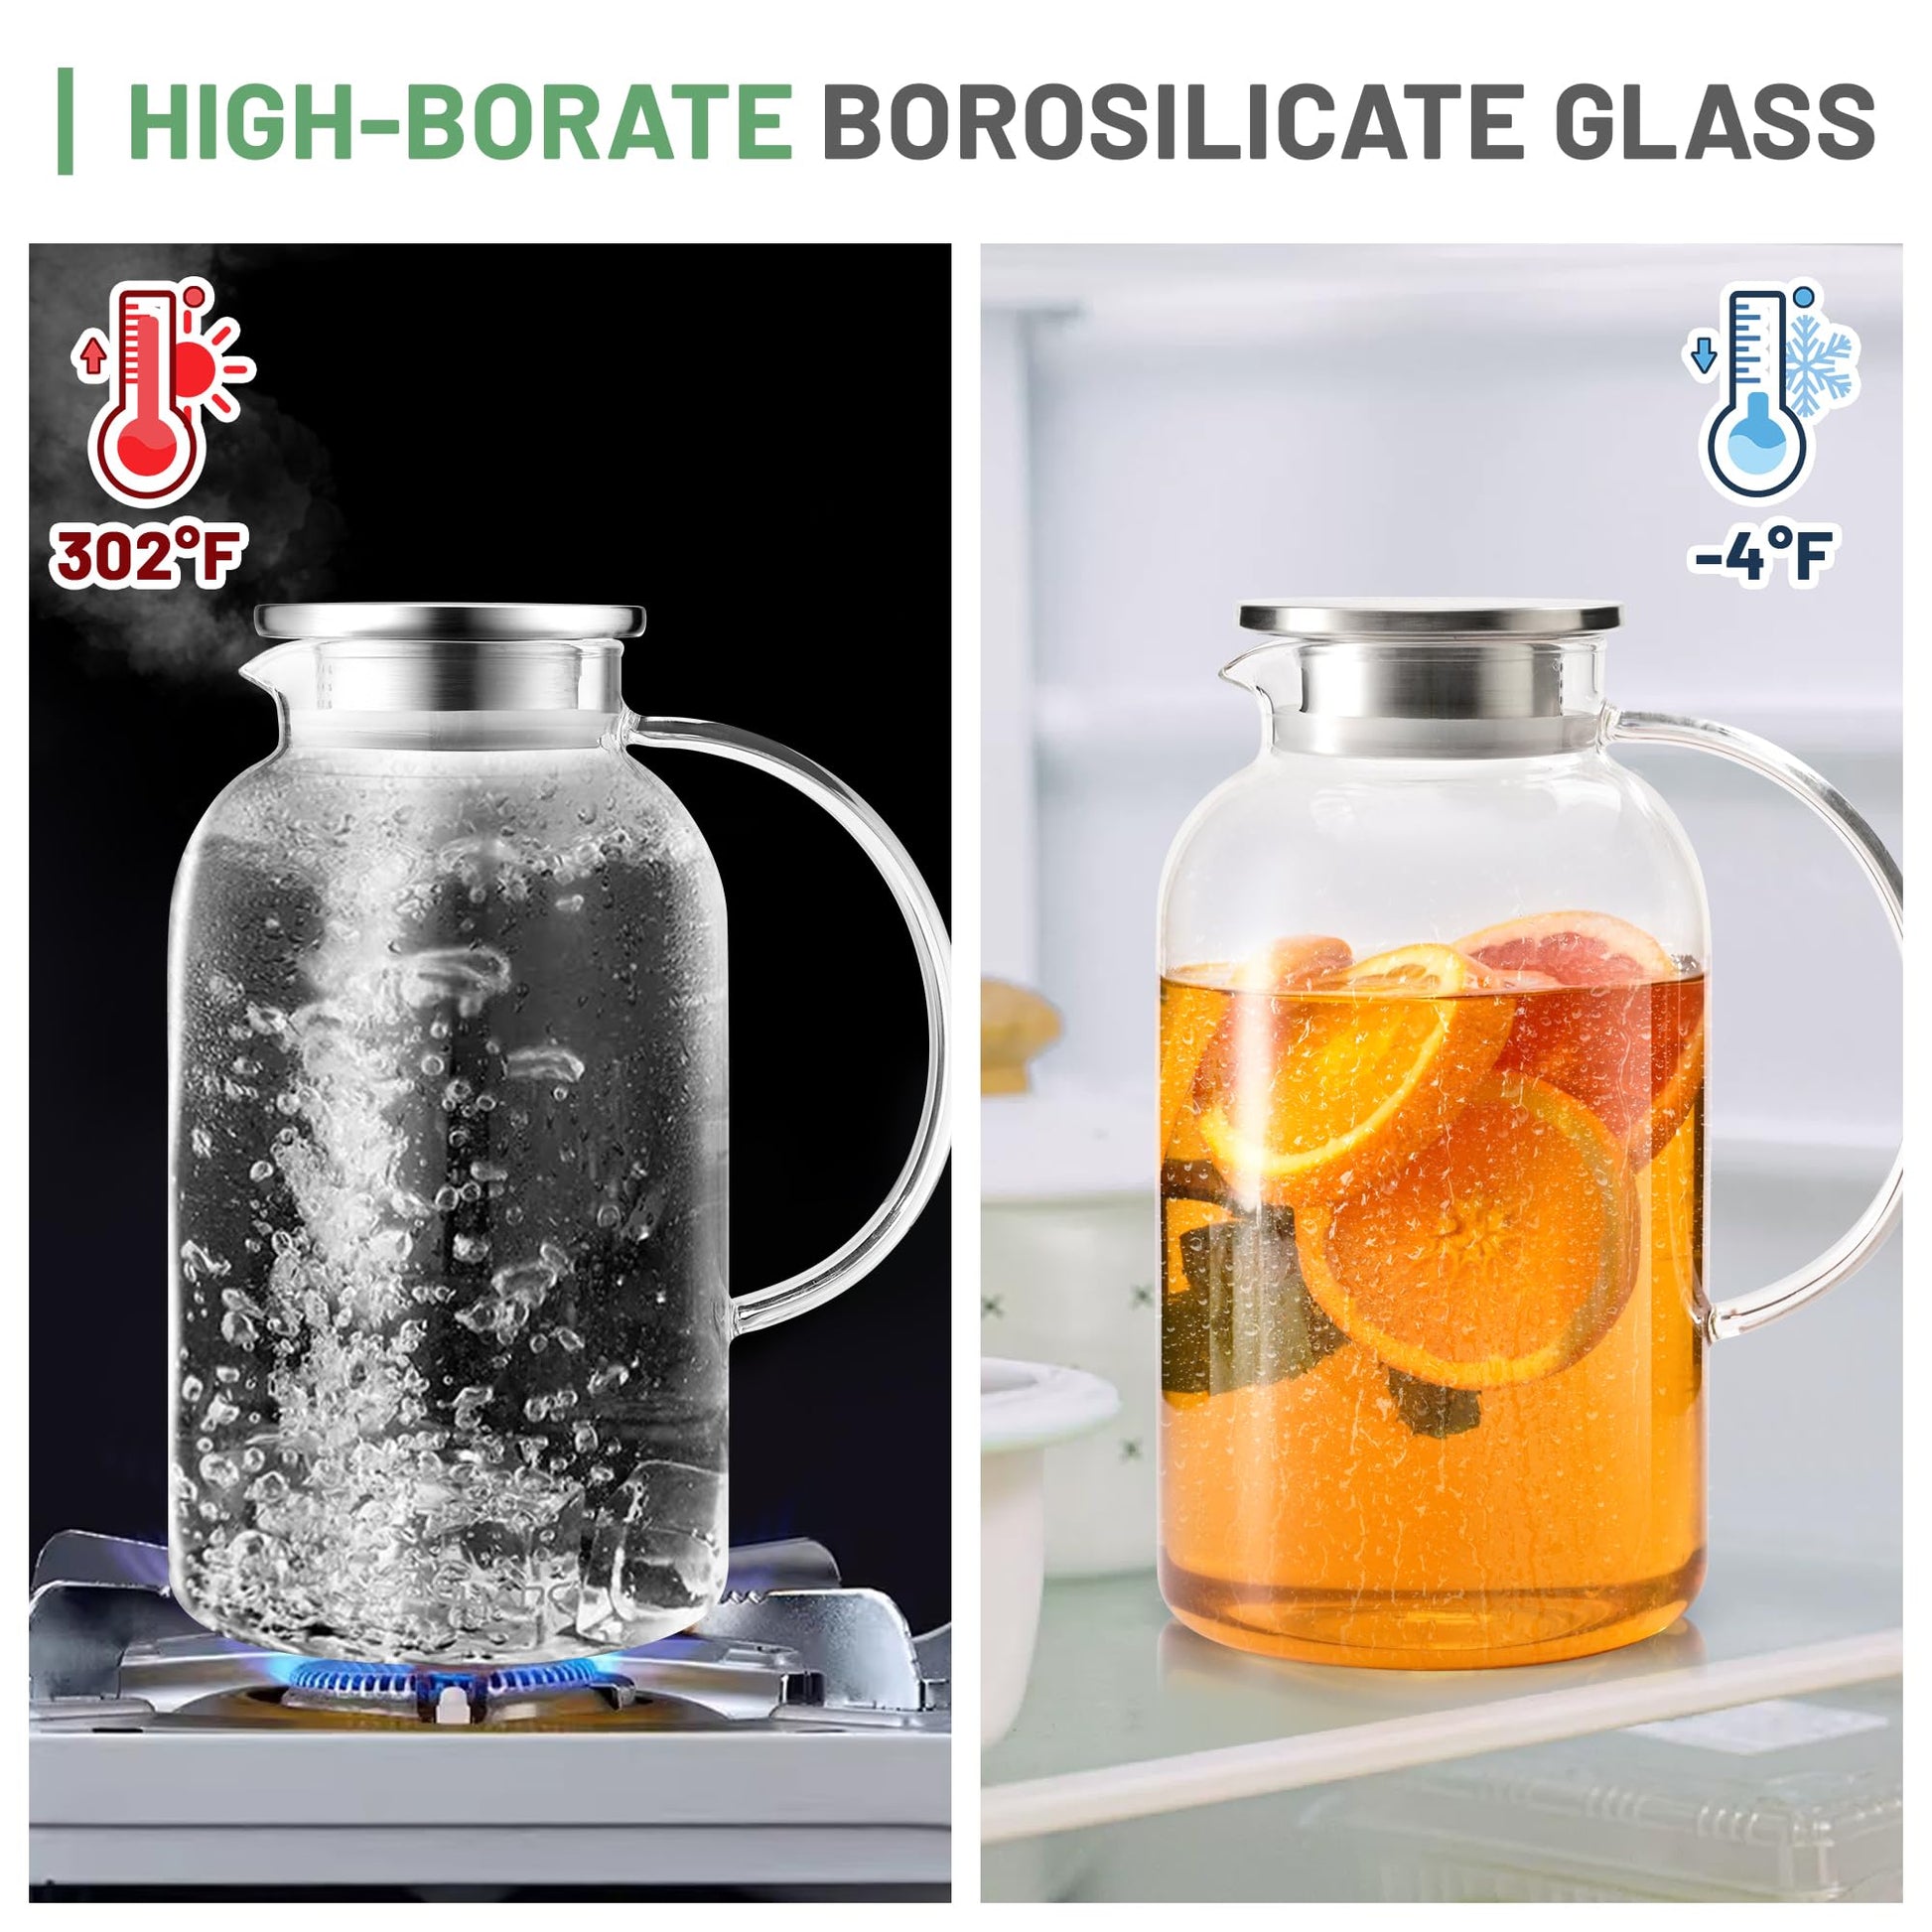 Water Jugs with Lids, 2L Glass Water Jug Glass Jug Water Jugs with Lids  Borosilicate Glass Water Jar Pitcher Water Carafe for Juice, Tea, Cold/Hot